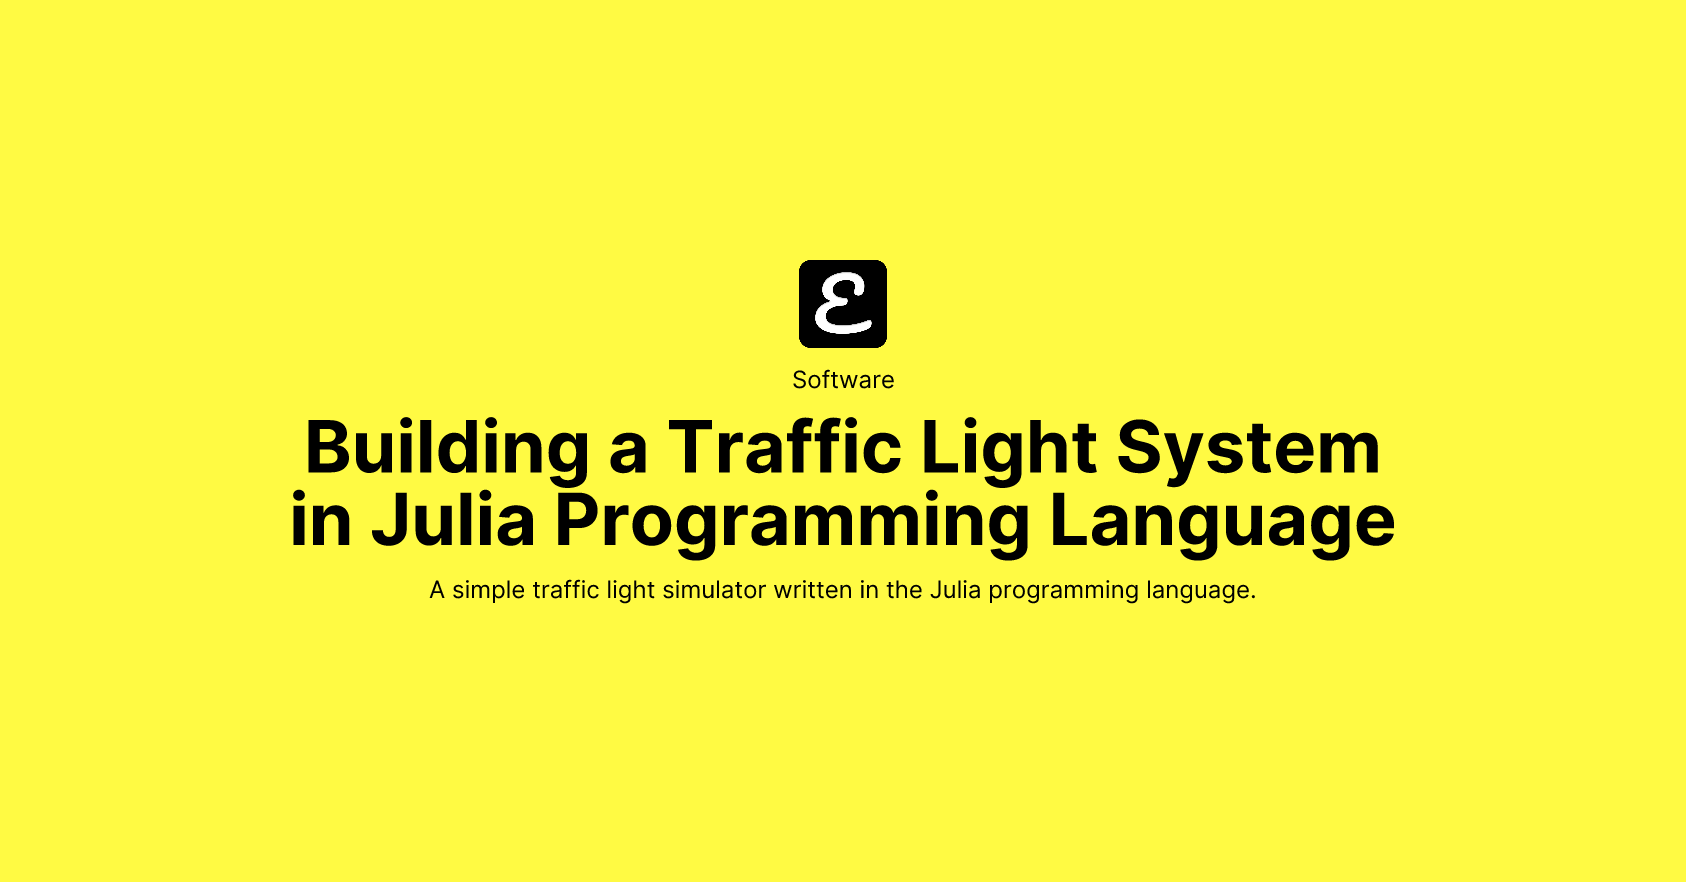 Building a Traffic Light System in Julia Programming Language by Eric David Smith